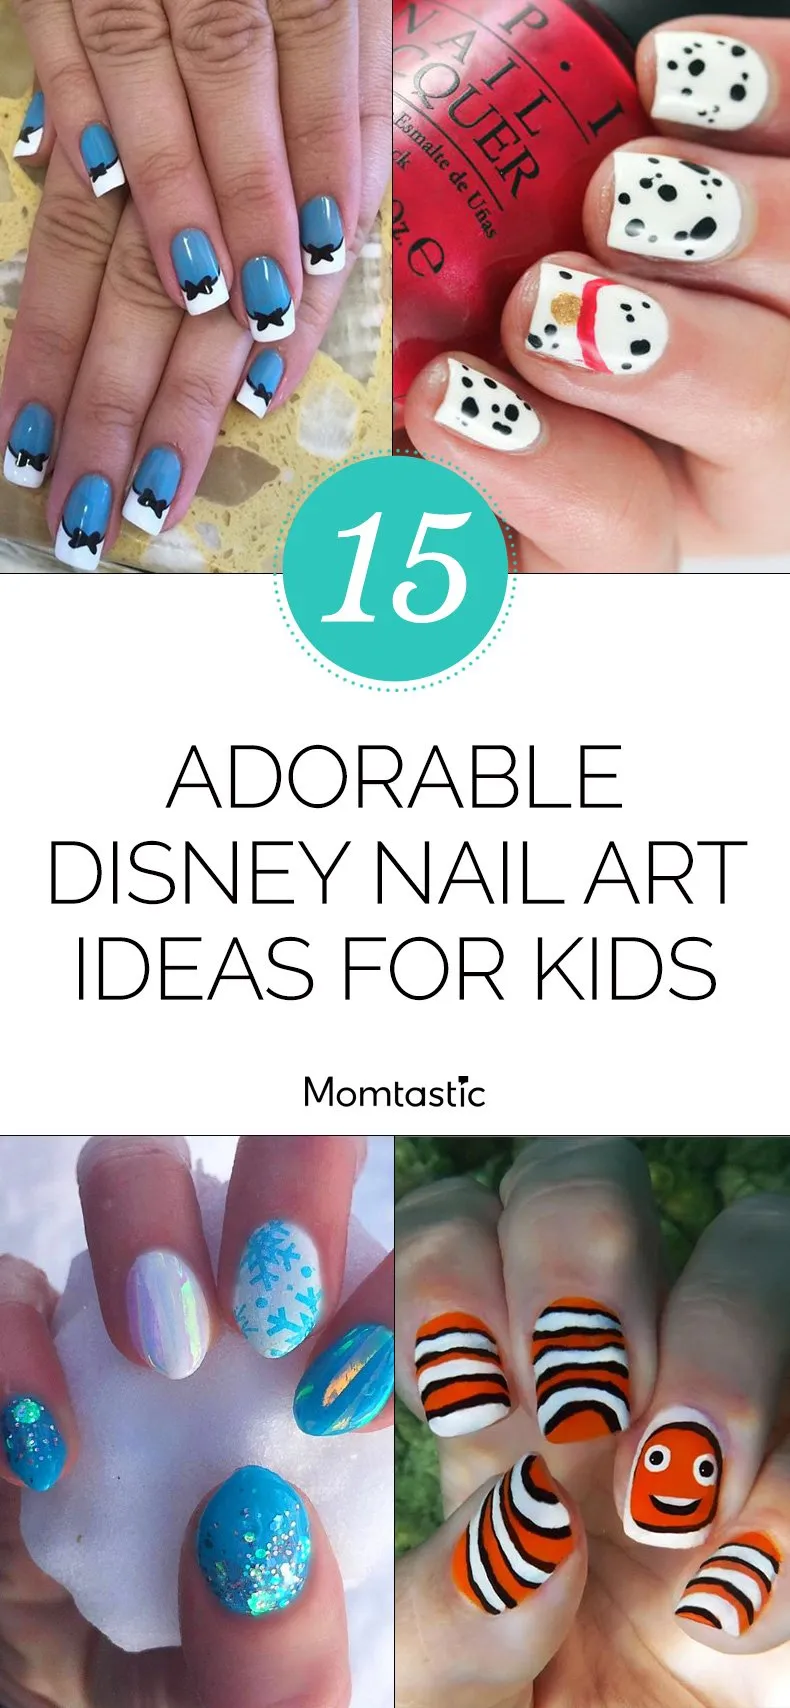 42 Disney Nails From Super Subtle to Full-Blown Designs